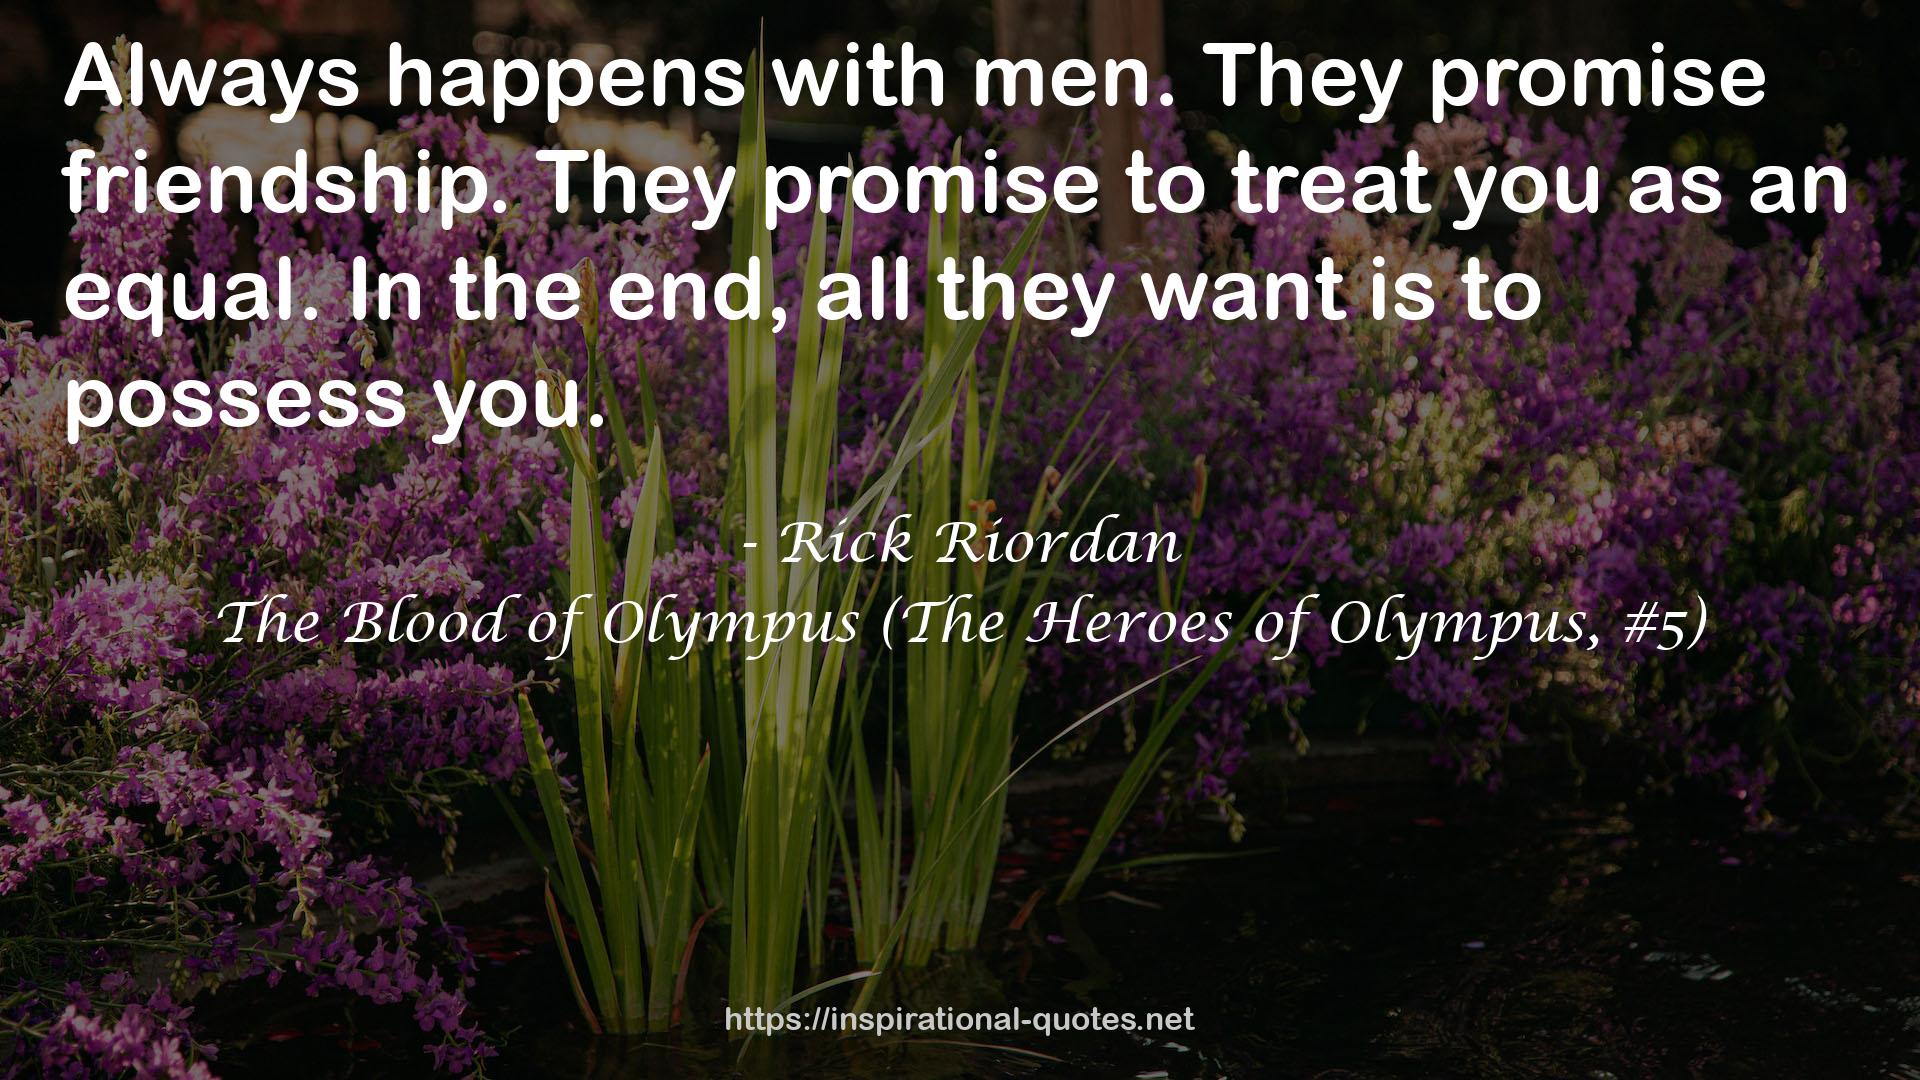 The Blood of Olympus (The Heroes of Olympus, #5) QUOTES